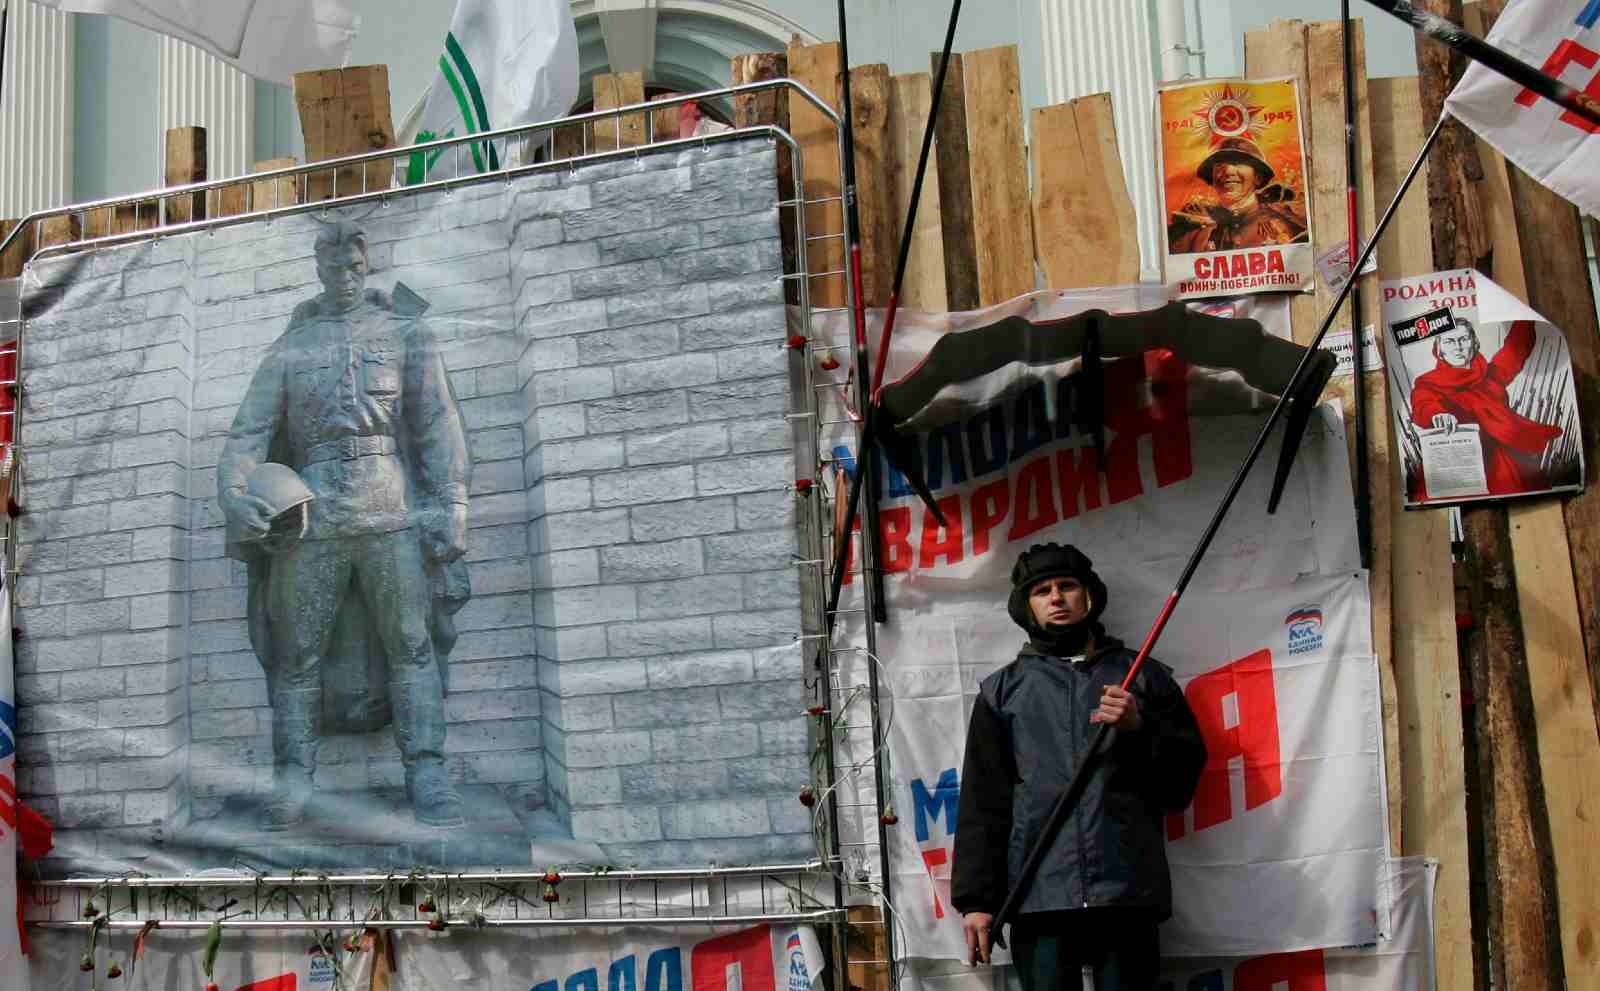 Photo: A protester holds a flag during a picket of Kremlin-loyal youth organizations in front of the Estonian embassy in Moscow on May 3, 2007. The poster on the left shows the statue of a Red Army soldier, whose relocation in Tallinn has sparked recent tensions between Russia and its ex-Soviet neighbor. Credit: REUTERS/Denis Sinyakov